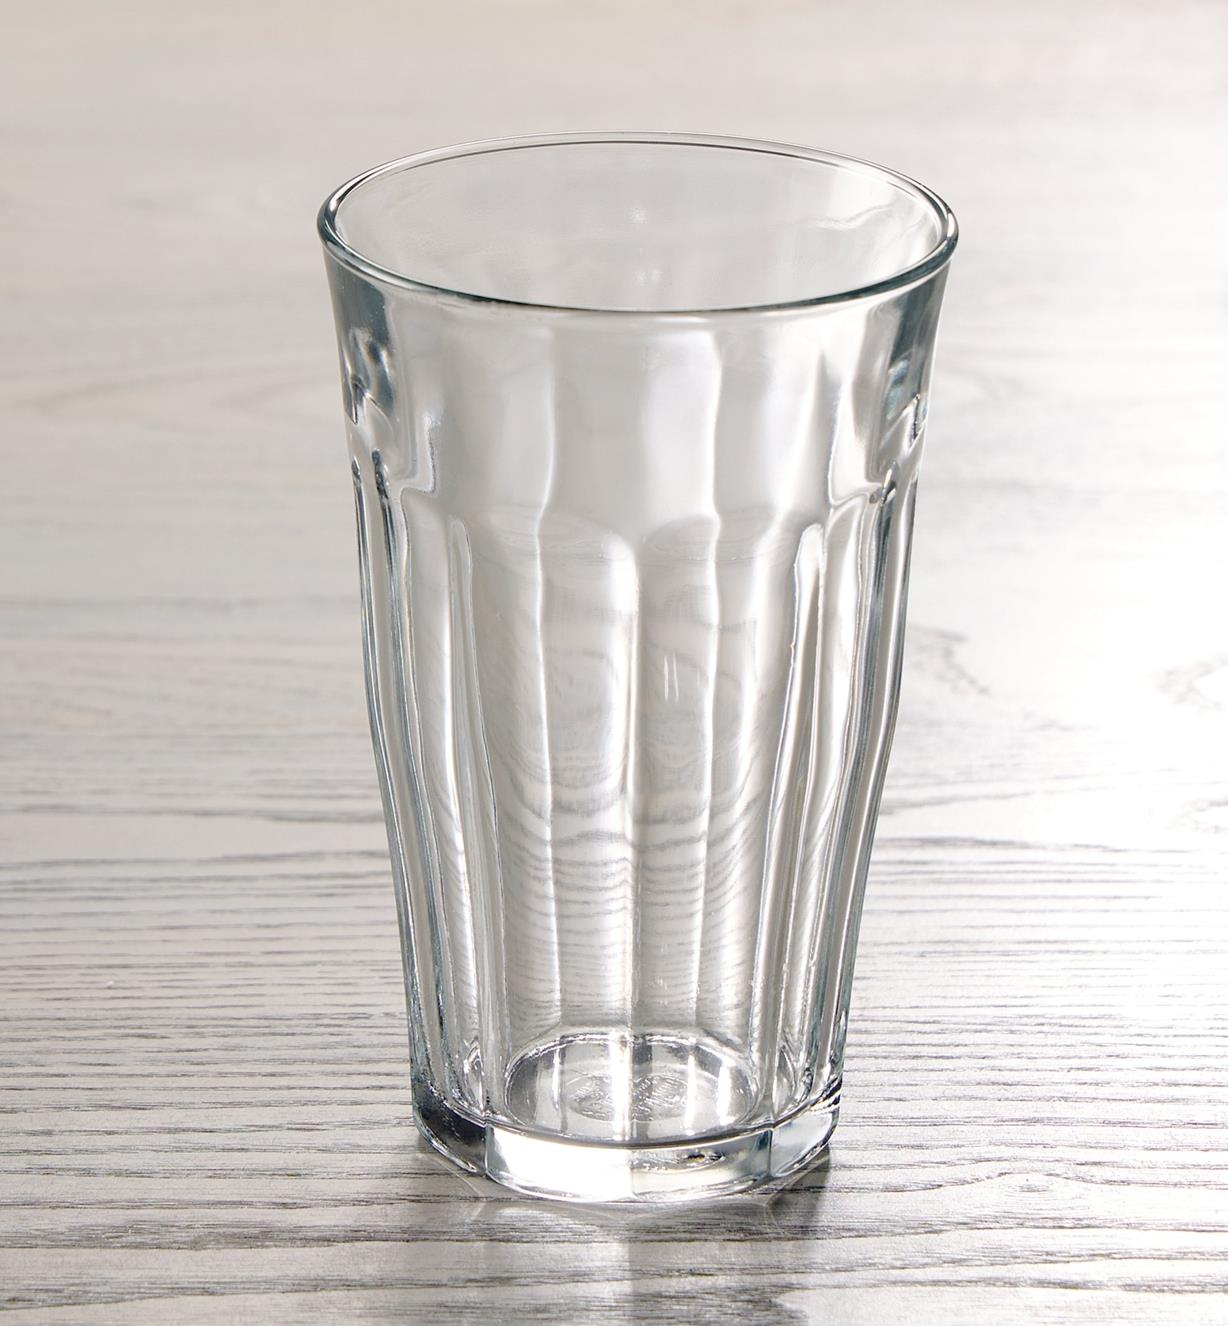 An empty 500ml Duralex Picardie glass placed on a wooden tabletop, backlit to show the fluted design